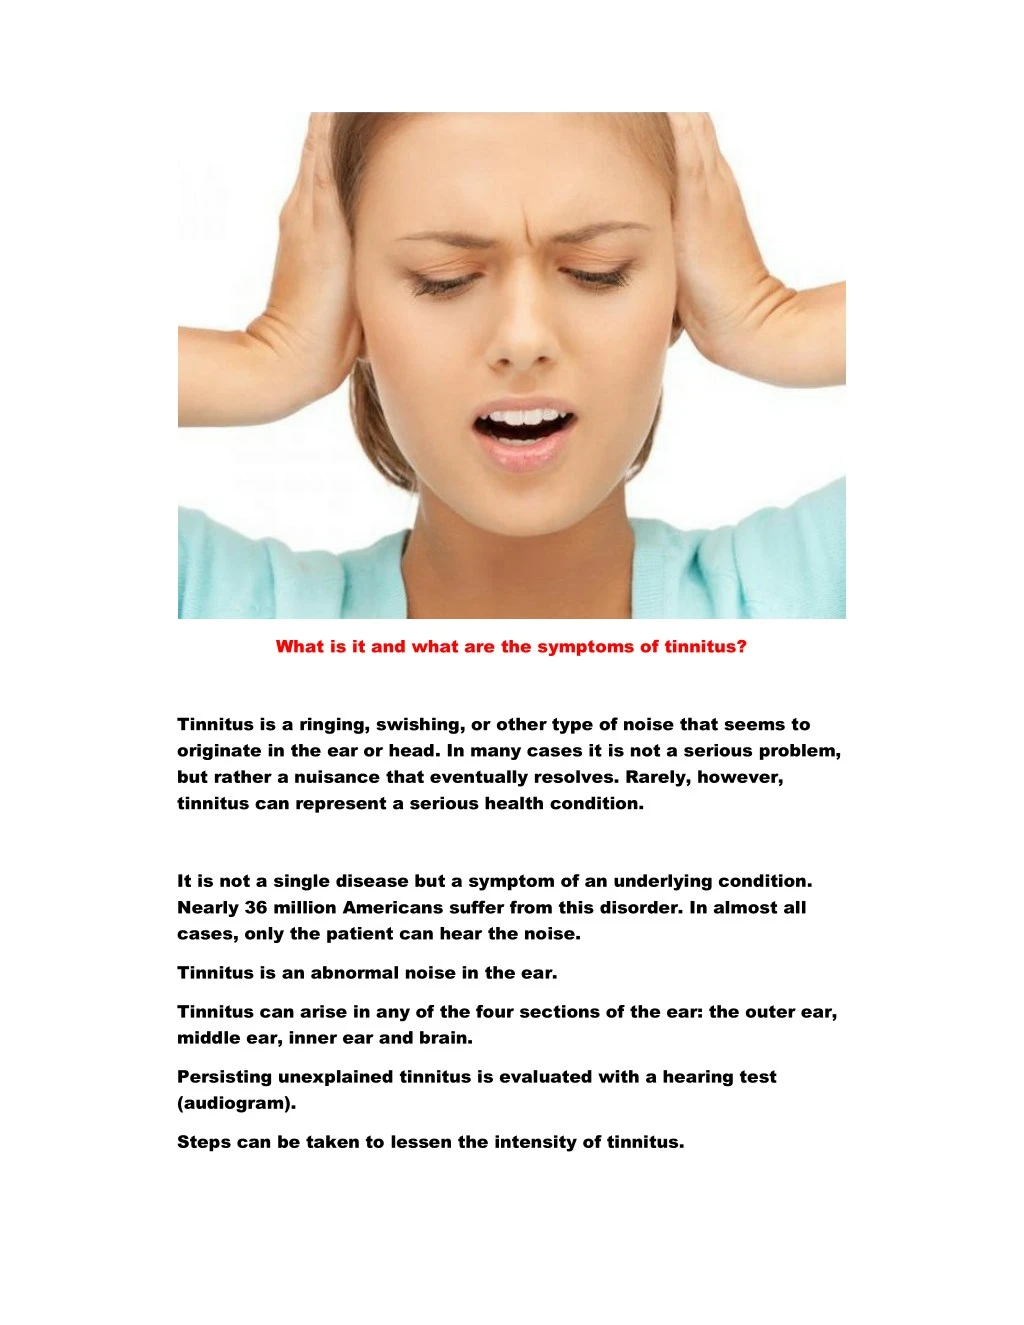 what is it and what are the symptoms of tinnitus